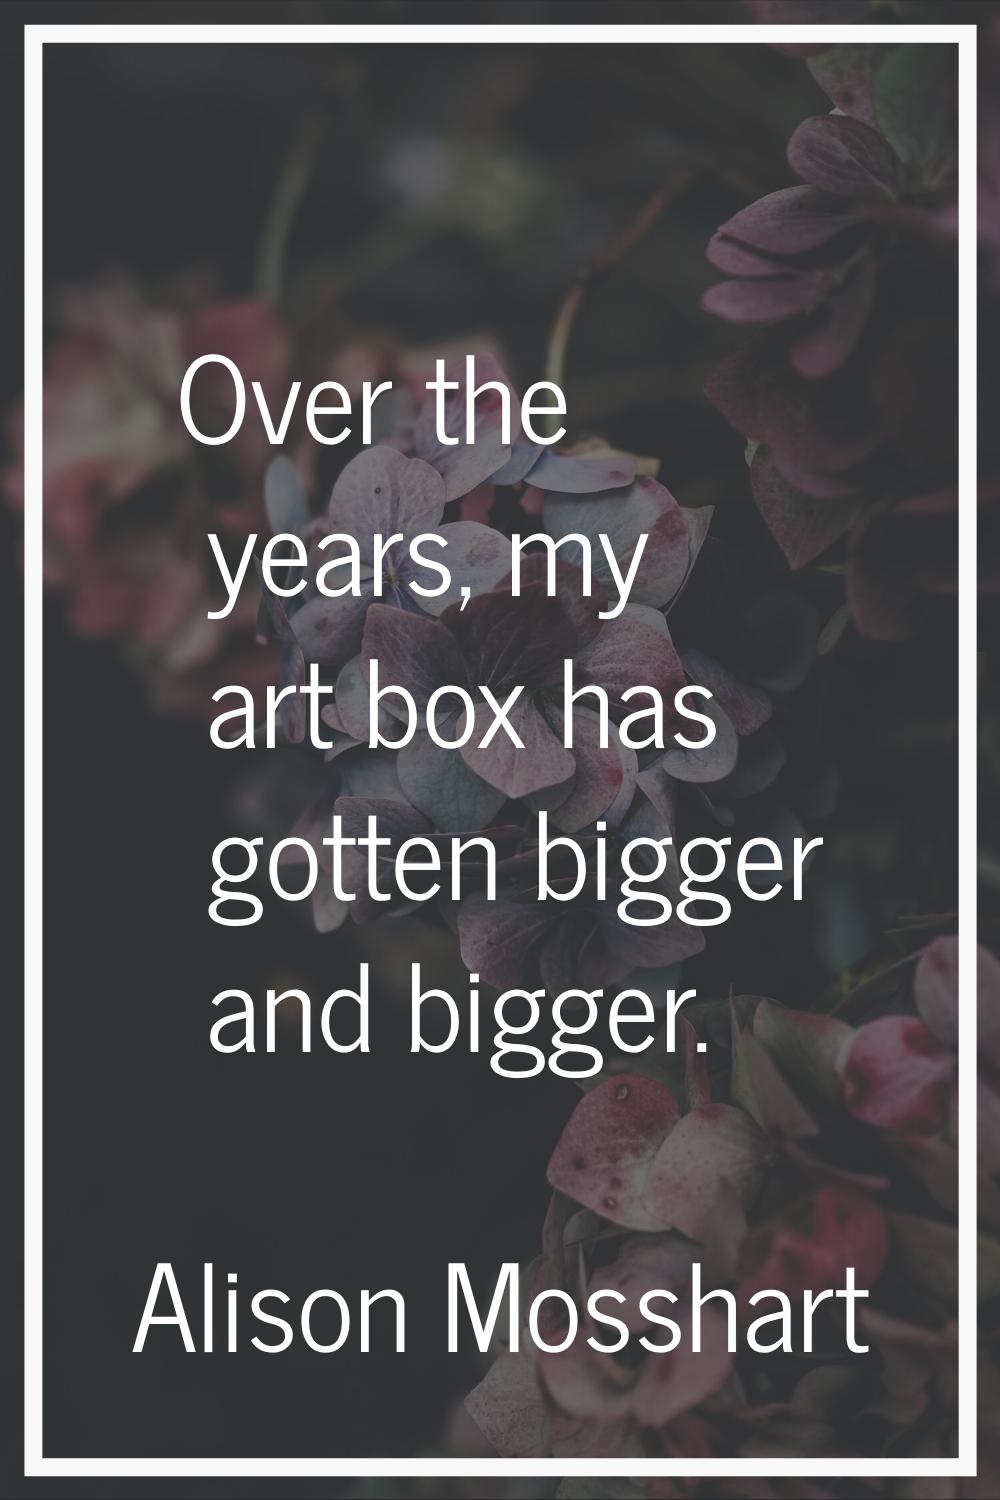 Over the years, my art box has gotten bigger and bigger.